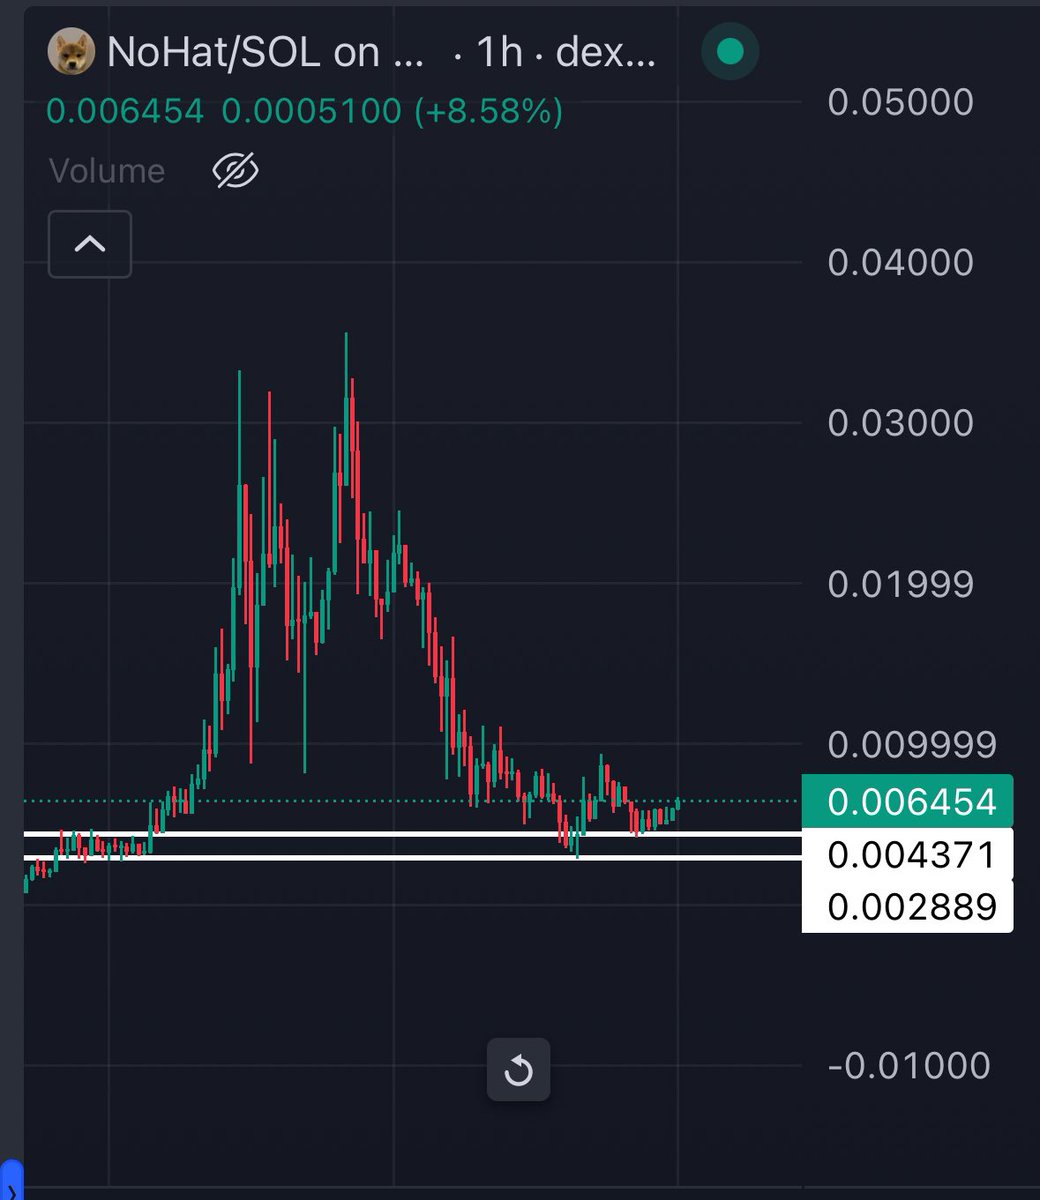 Fuck it! 

I added a bag of $NOHAT cause chart is primed for a run and community going insane.